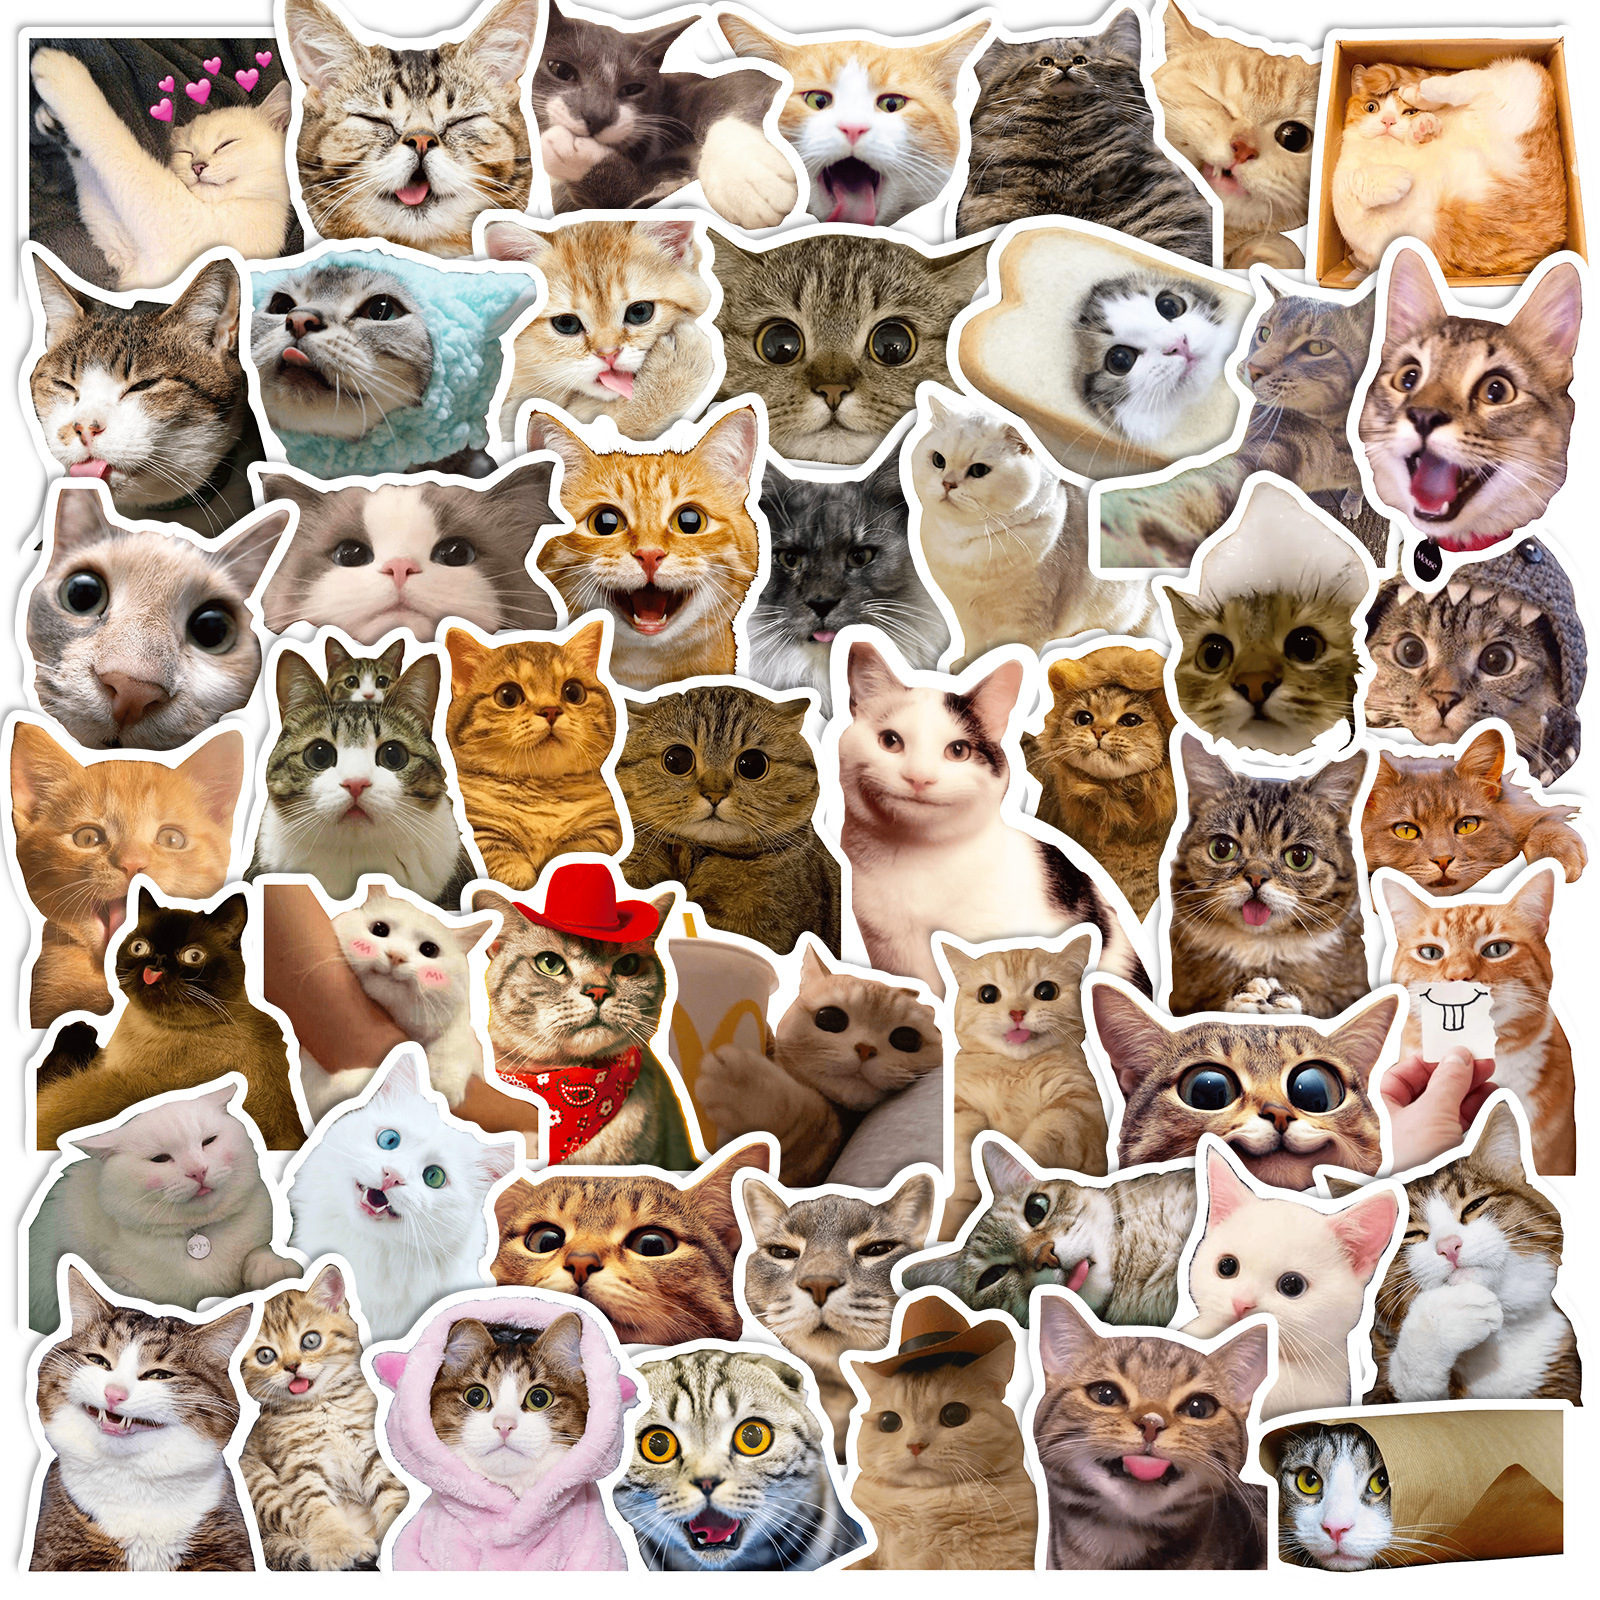 Charming Feline Fantasy: 50 Adorable Cat Stickers - Cute & Trendy Decals